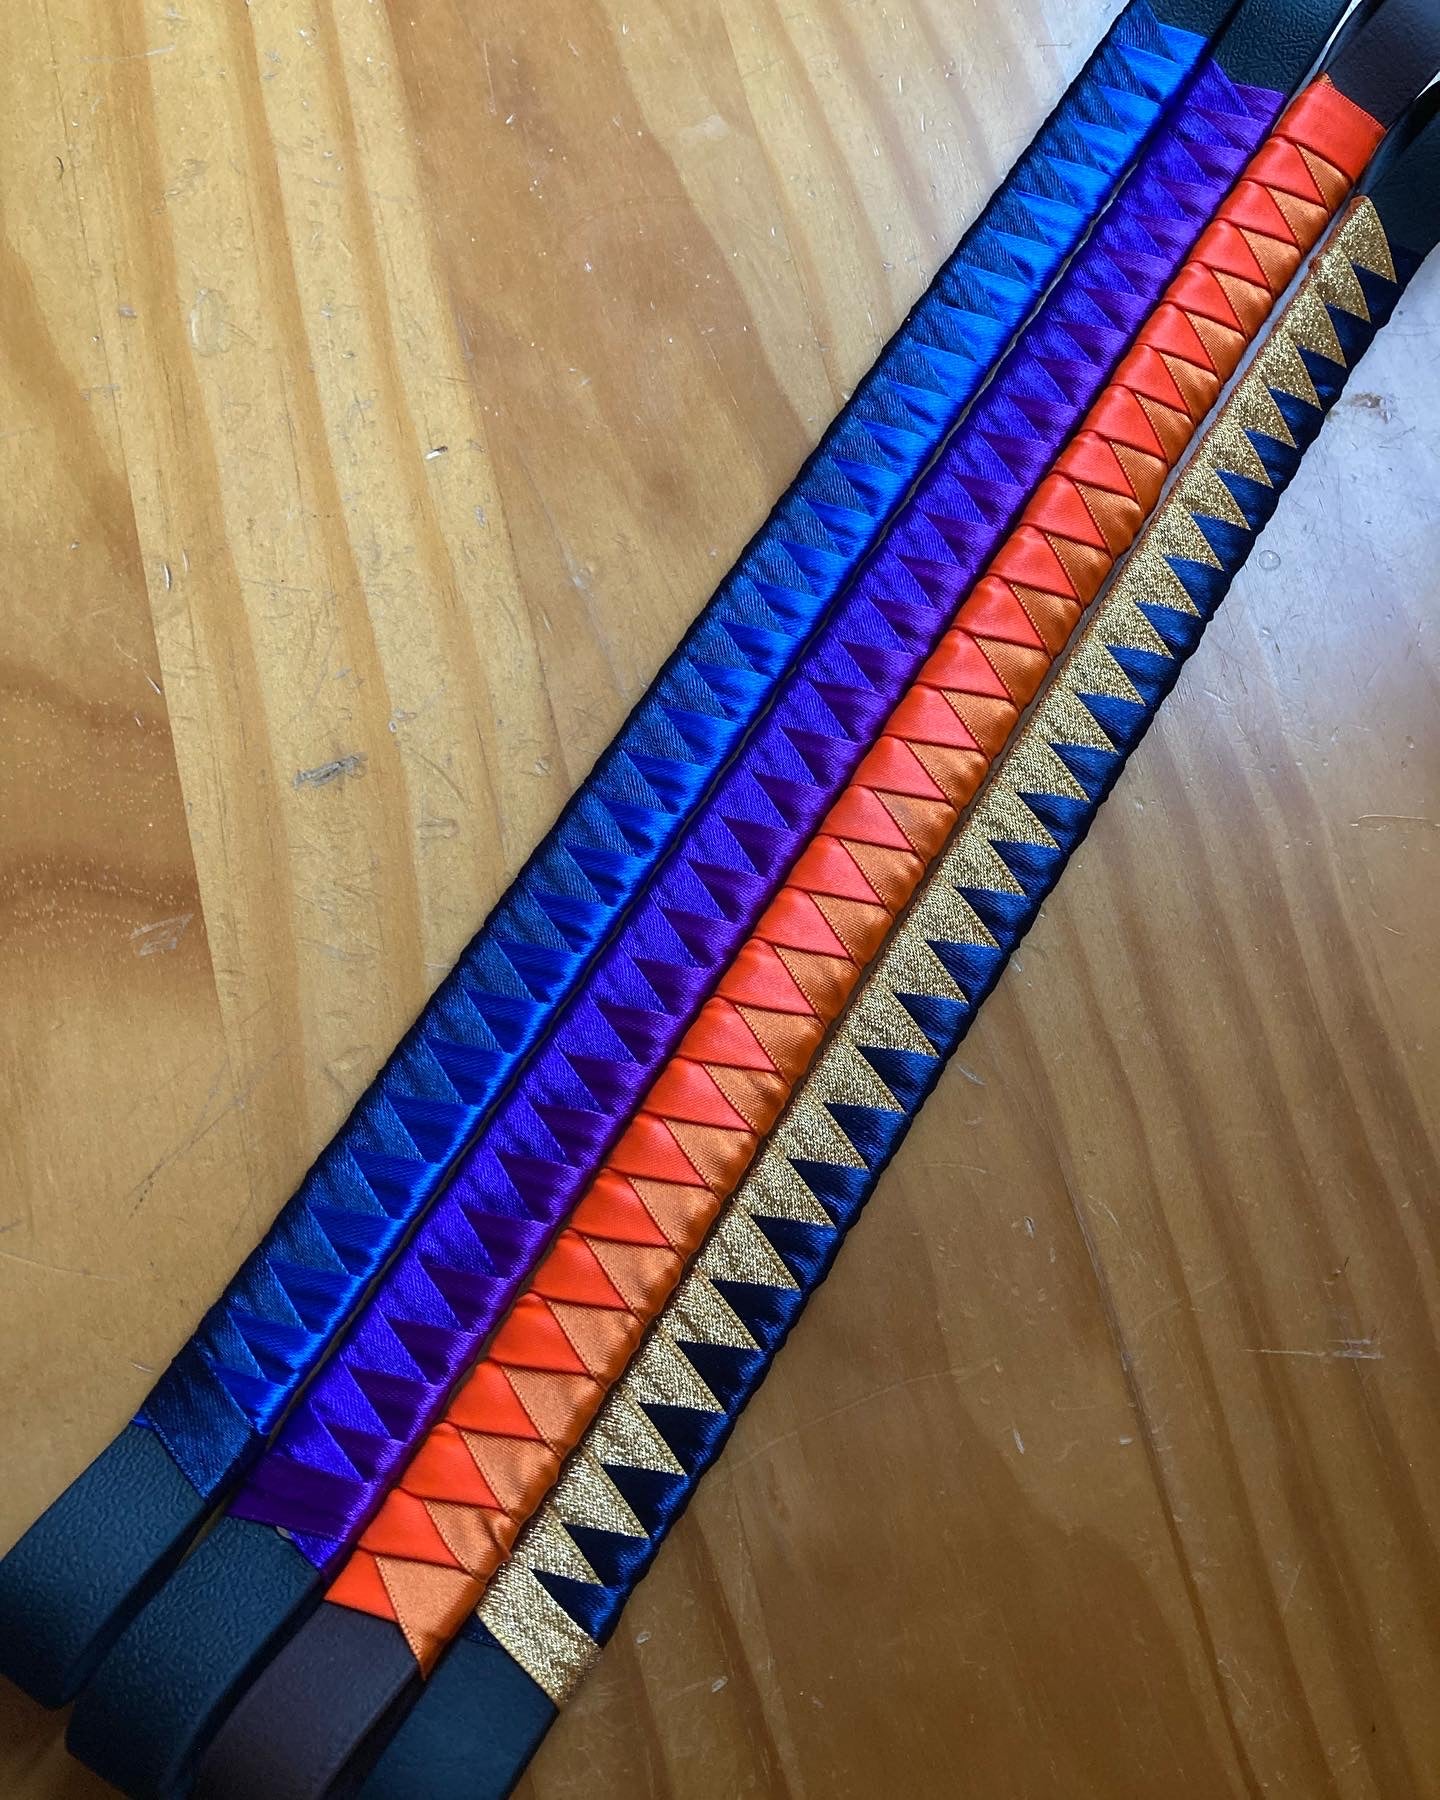 4 two-coloured bespoke browbands